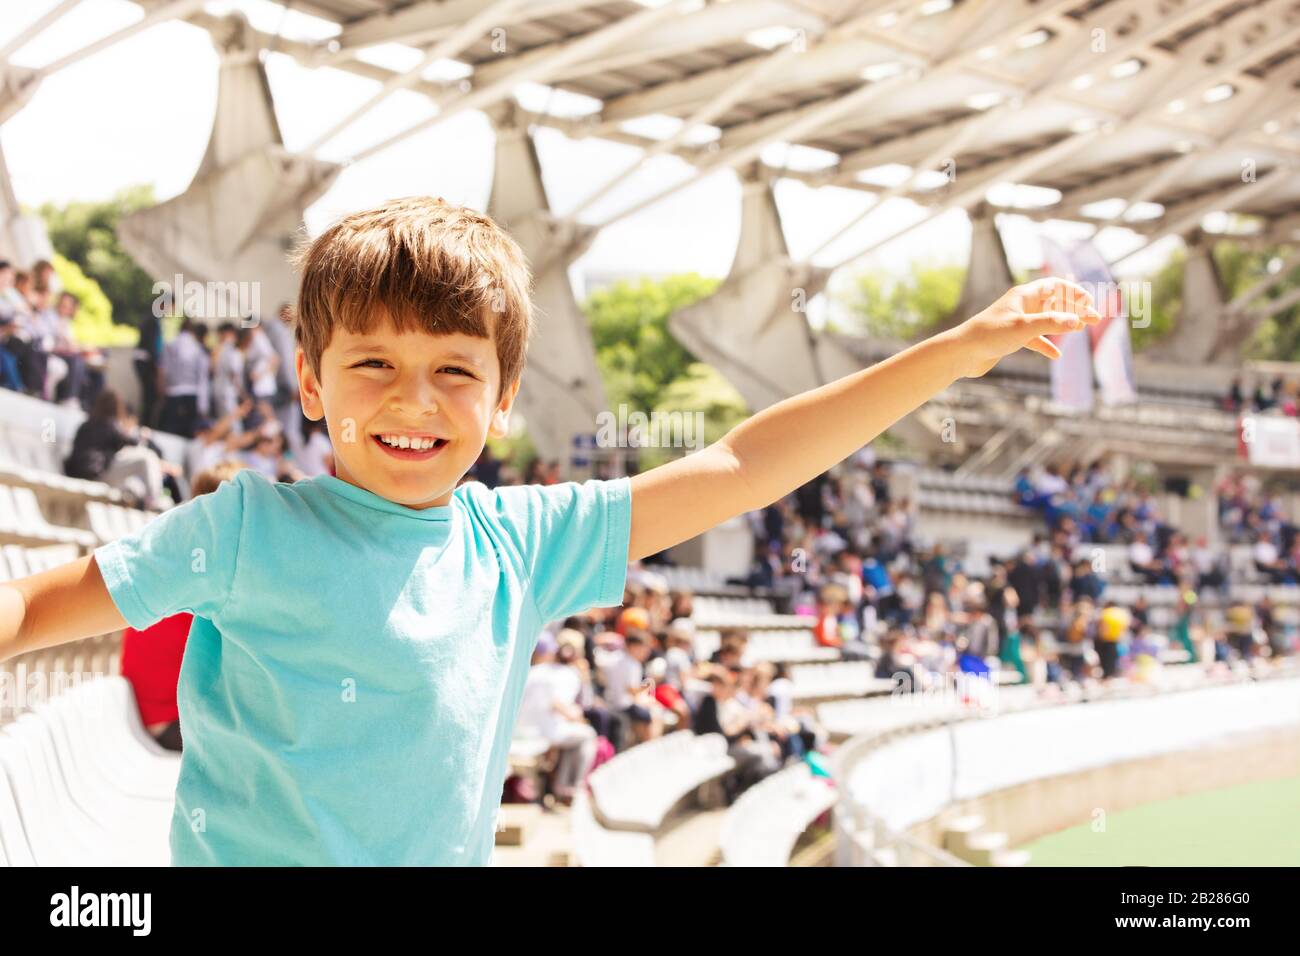 Happy smiling boy on the stadium waving hands smile and look at camera watching sport game Stock Photo